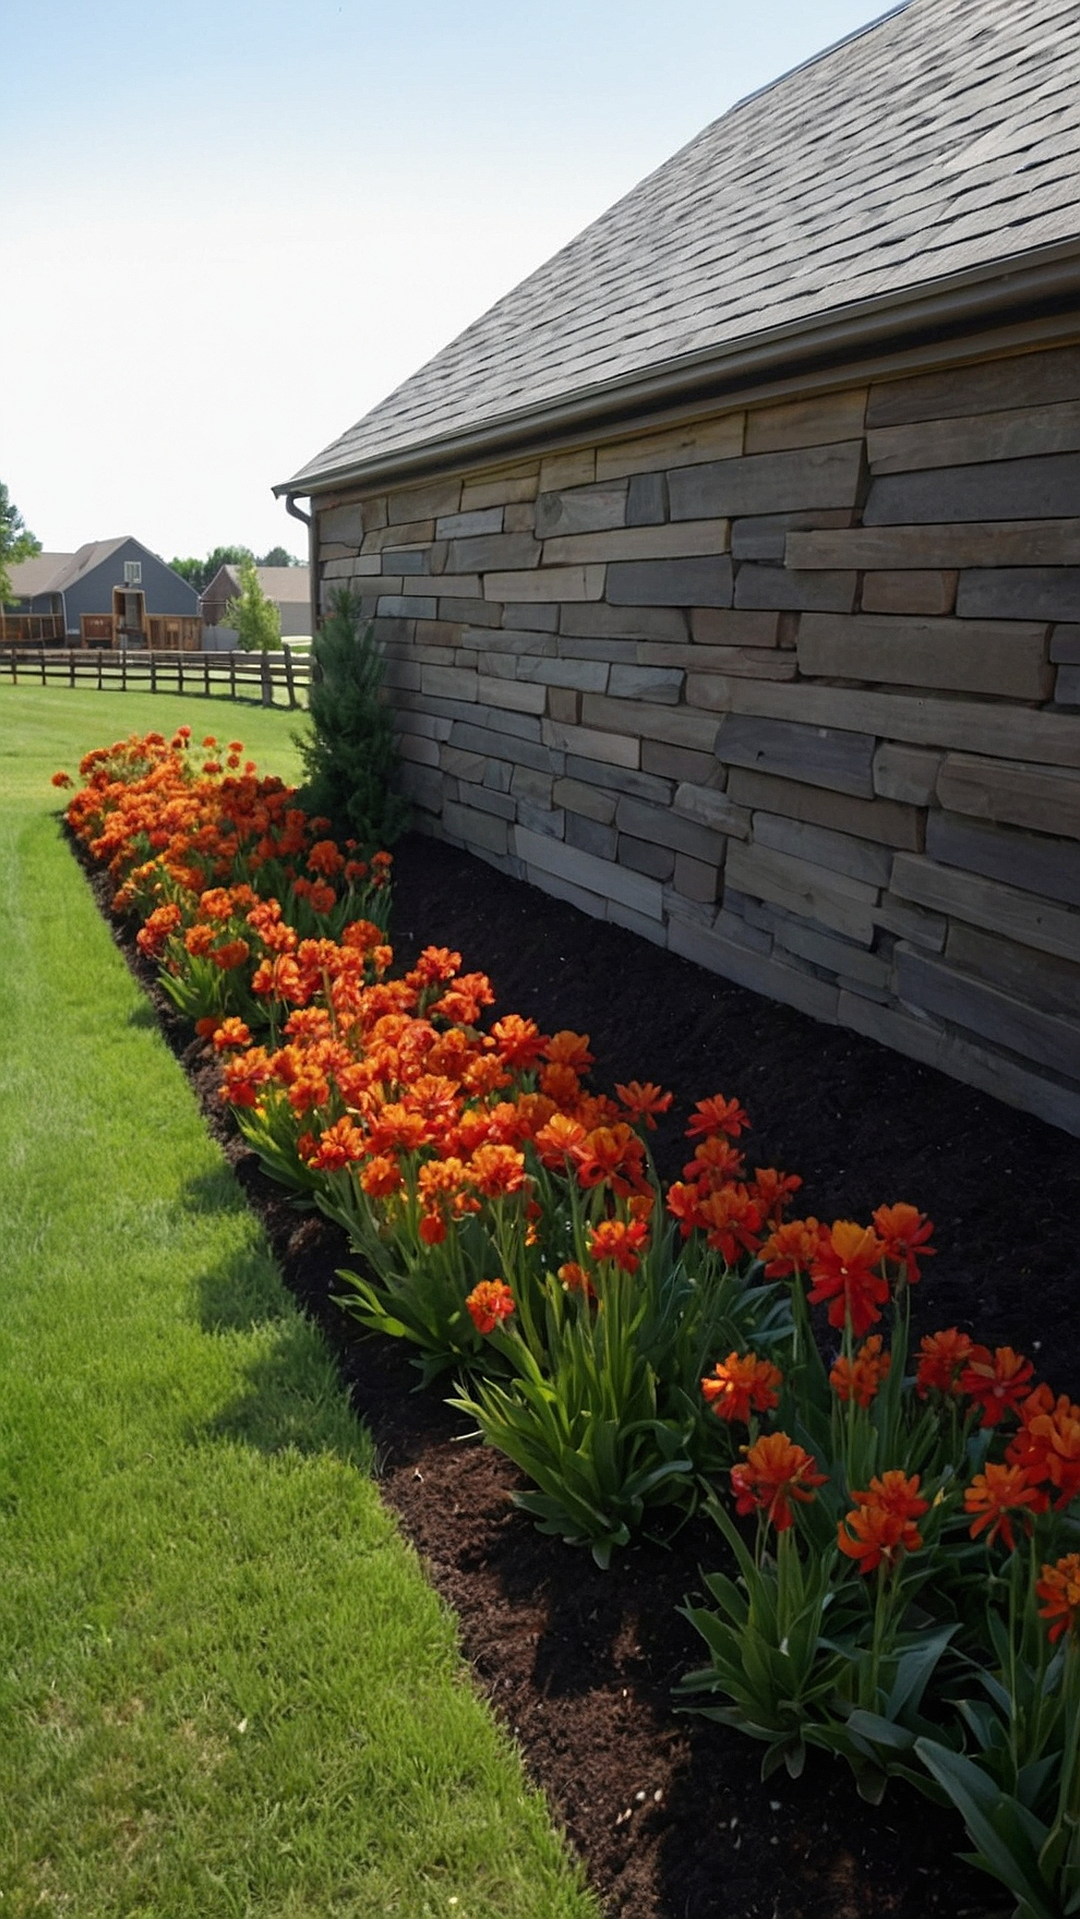 Floral Frames: Creating Beautiful Fence Lines